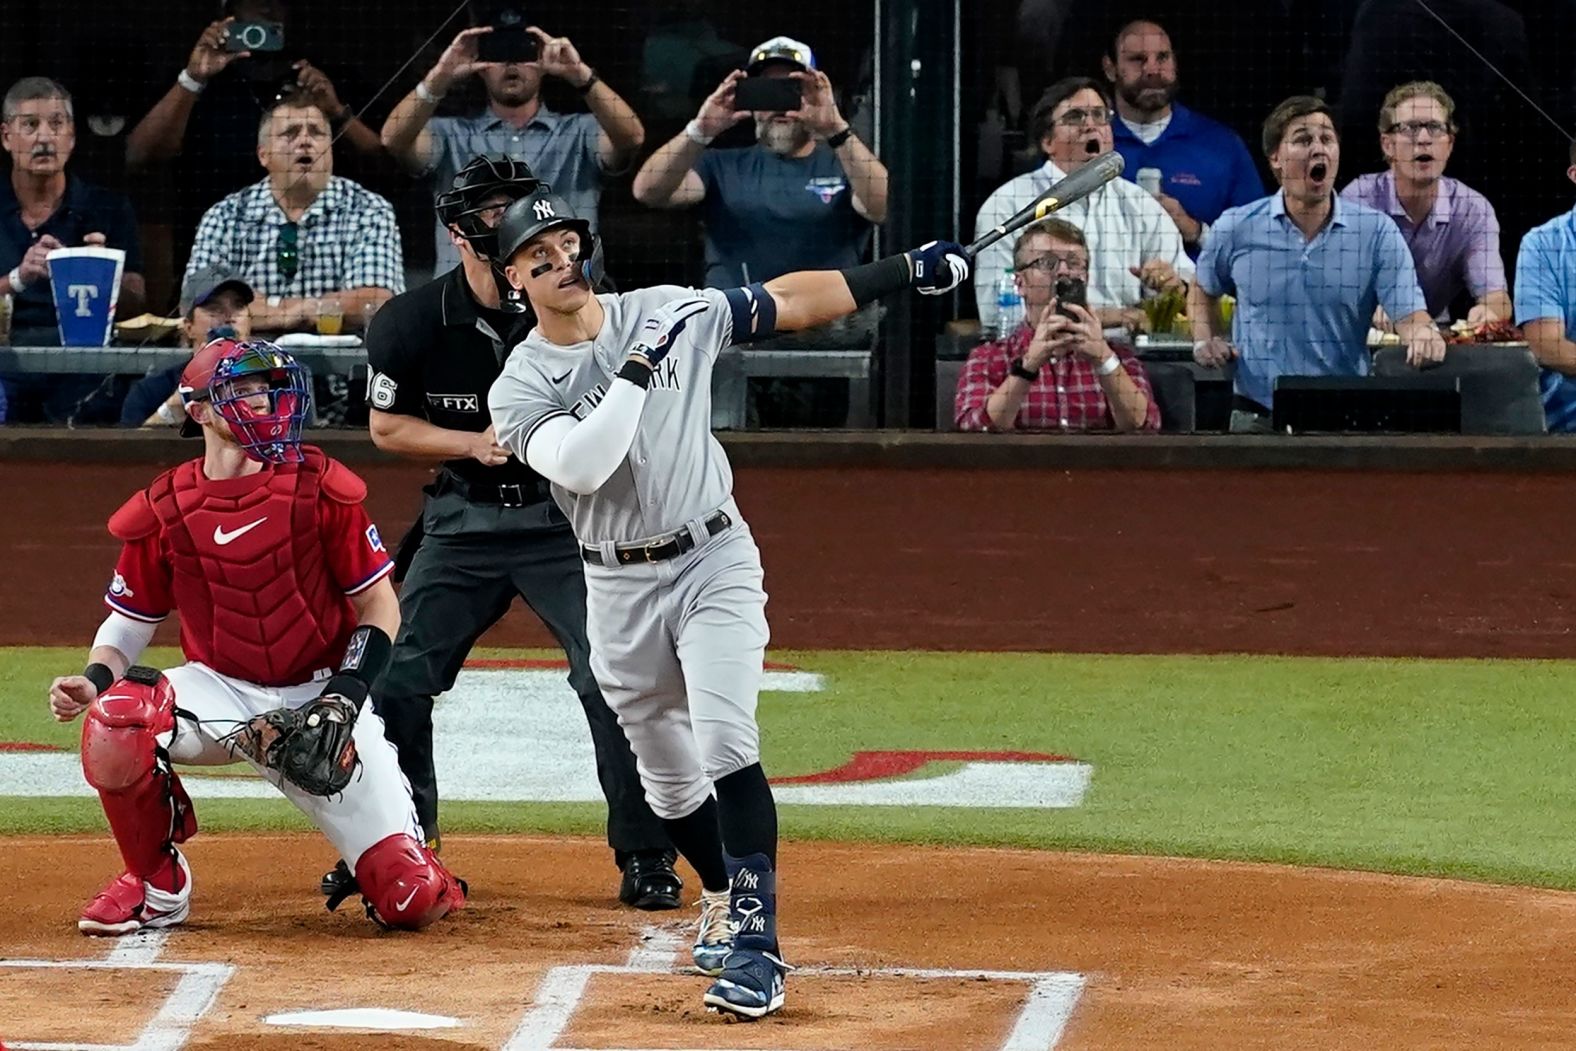 Aaron Judge of the New York Yankees <a href="https://www.cnn.com/2022/10/04/sport/mlb-aaron-judge-62nd-home-run-spt-intl/index.html" target="_blank">hits his 62nd home run</a> of the season in a game against the Texas Rangers on Tuesday, October 4. With the home run, Judge set the American League record for home runs in a single season, passing Roger Maris.